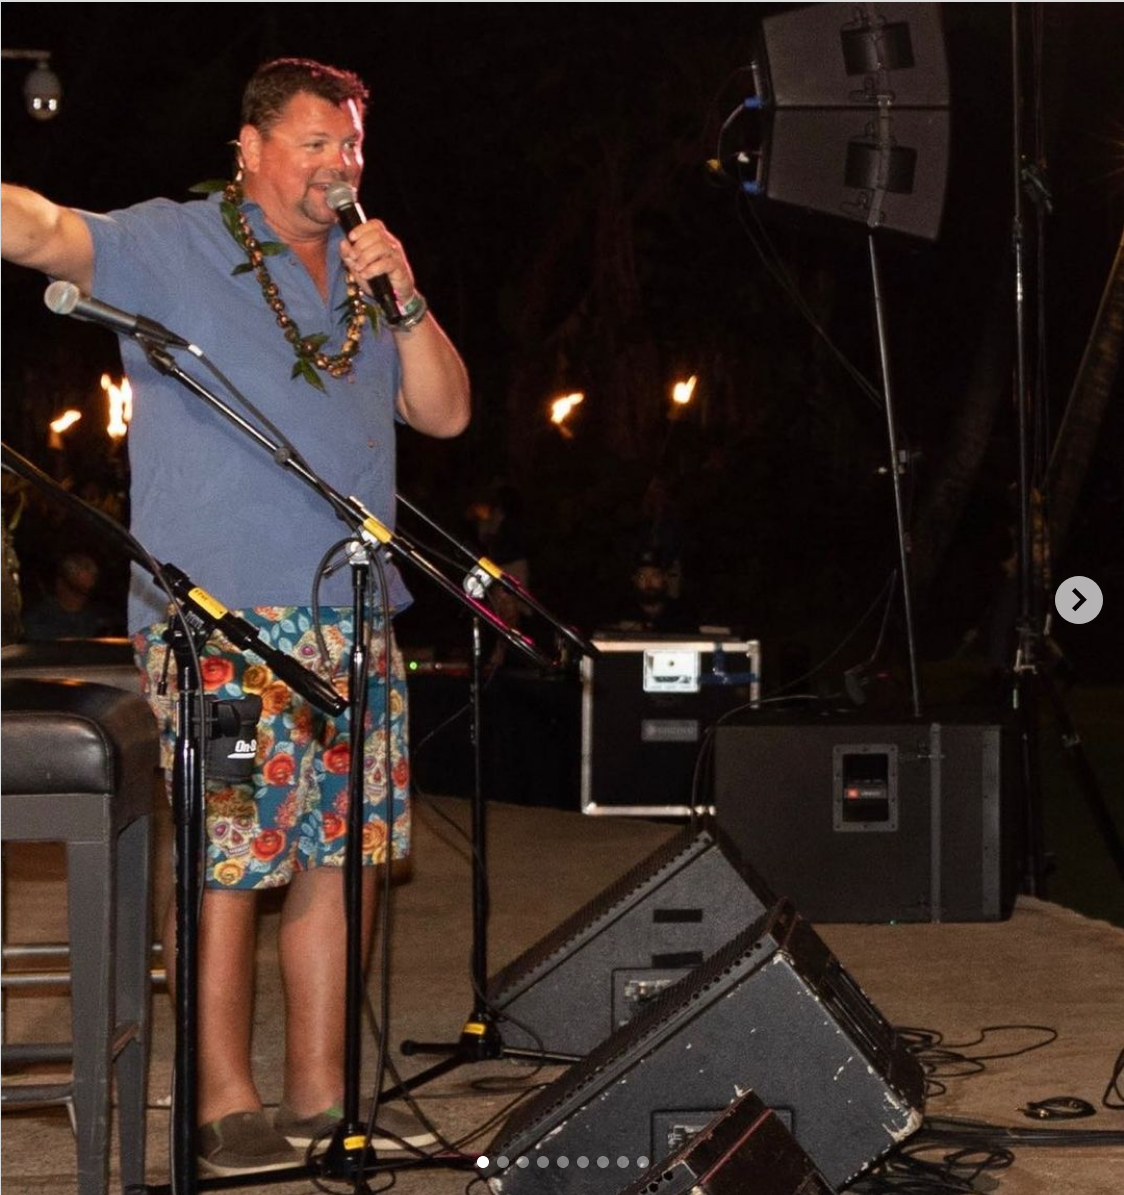 Emcee Storme Warren leading the auction at Molokini Garden Lawn during Chris Young and Friends Finale for the 2023 Maui Songwriter's Festival